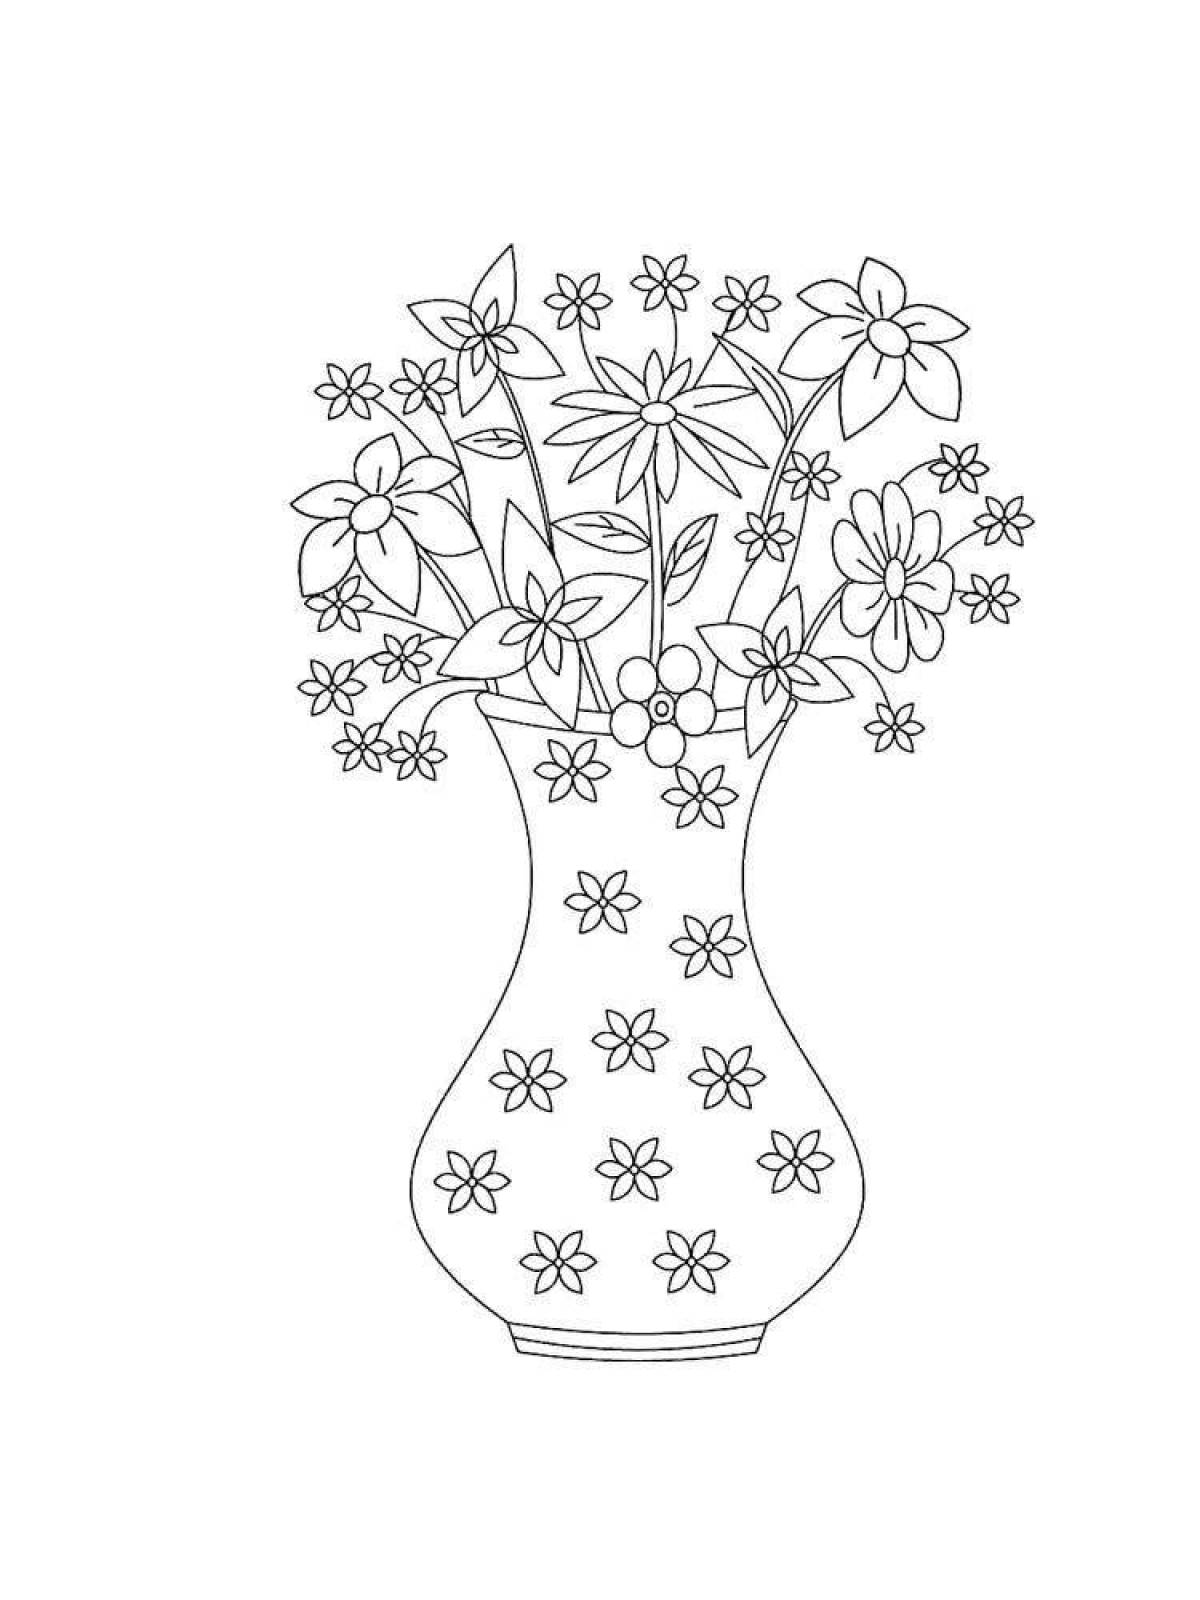 Coloring page charming vase of flowers